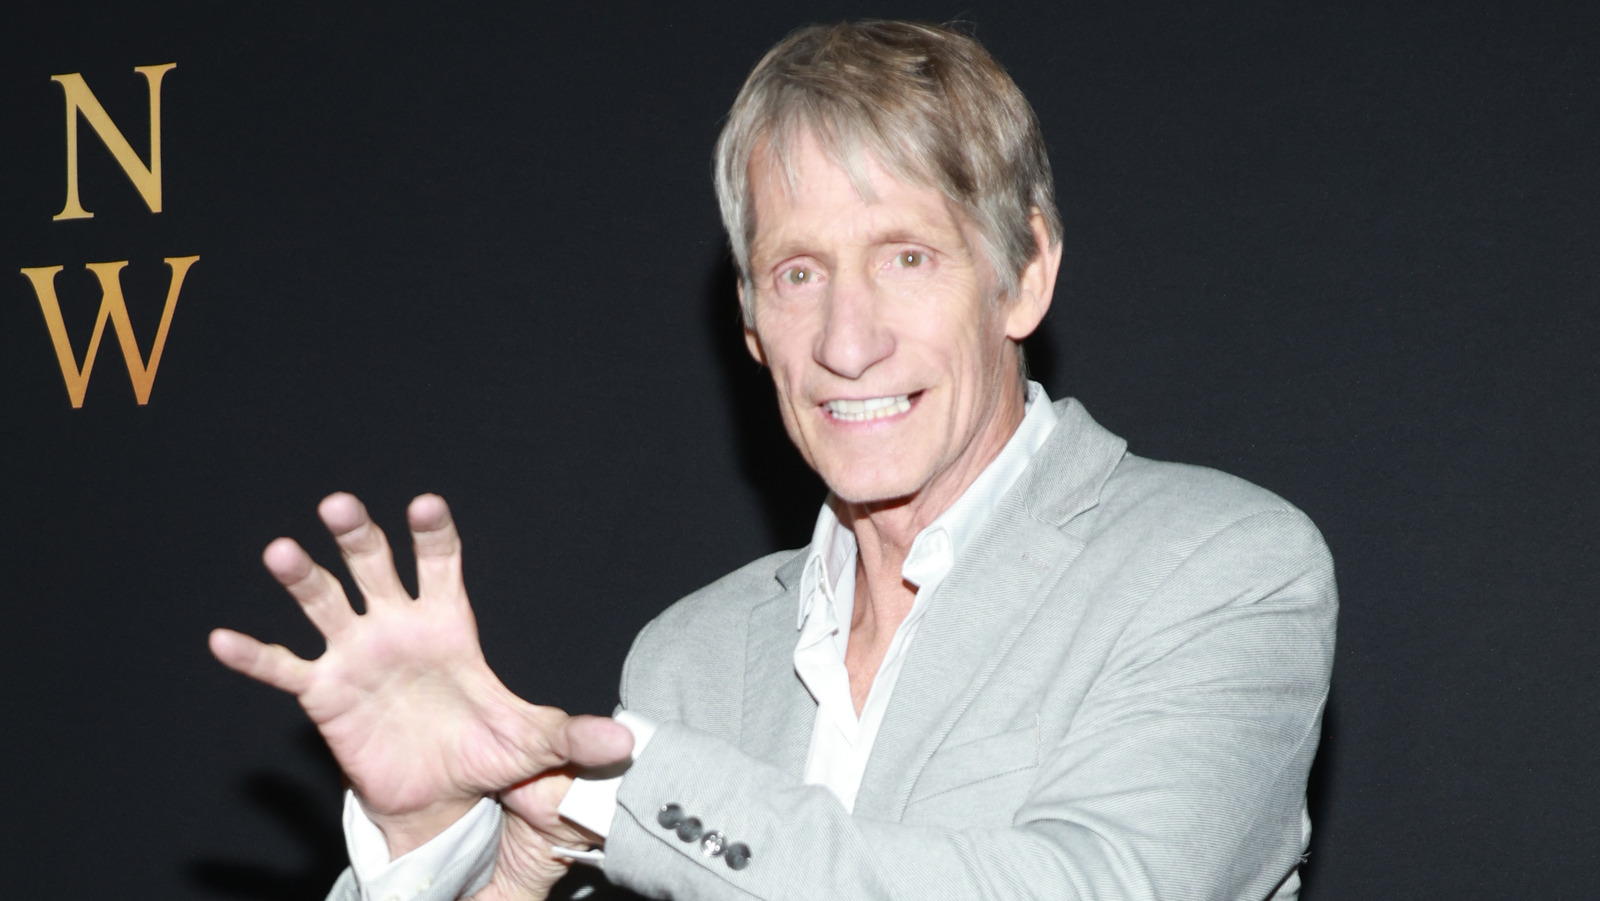 Kevin Von Erich Argues Iron Claw Movie Doesn't Depict One Family Member Accurately